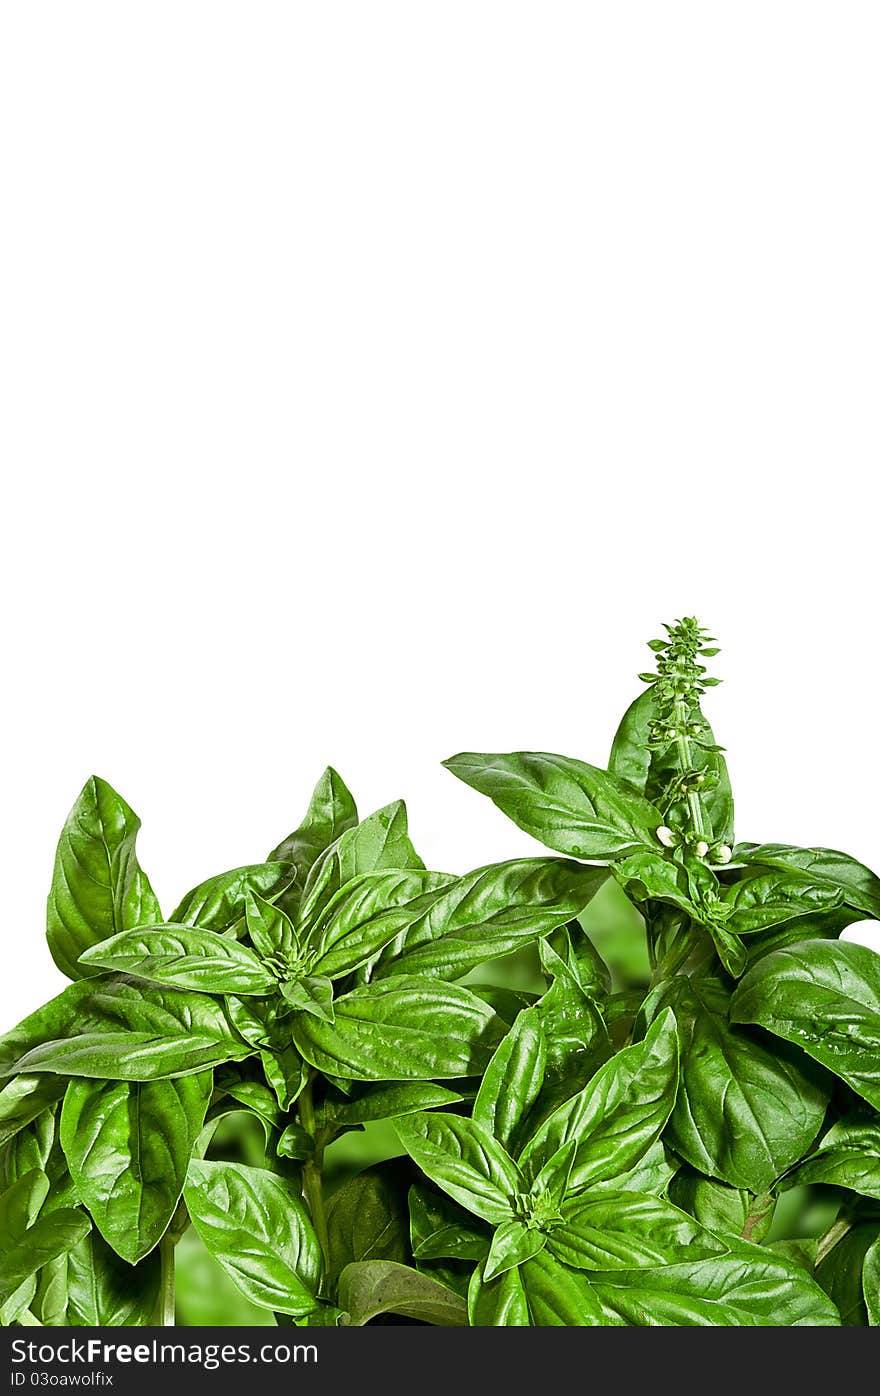 Fragrant basil border, isolated on white, with plenty of copyspace. Summer concept, Mediterranean cuisine concept. Fragrant basil border, isolated on white, with plenty of copyspace. Summer concept, Mediterranean cuisine concept.